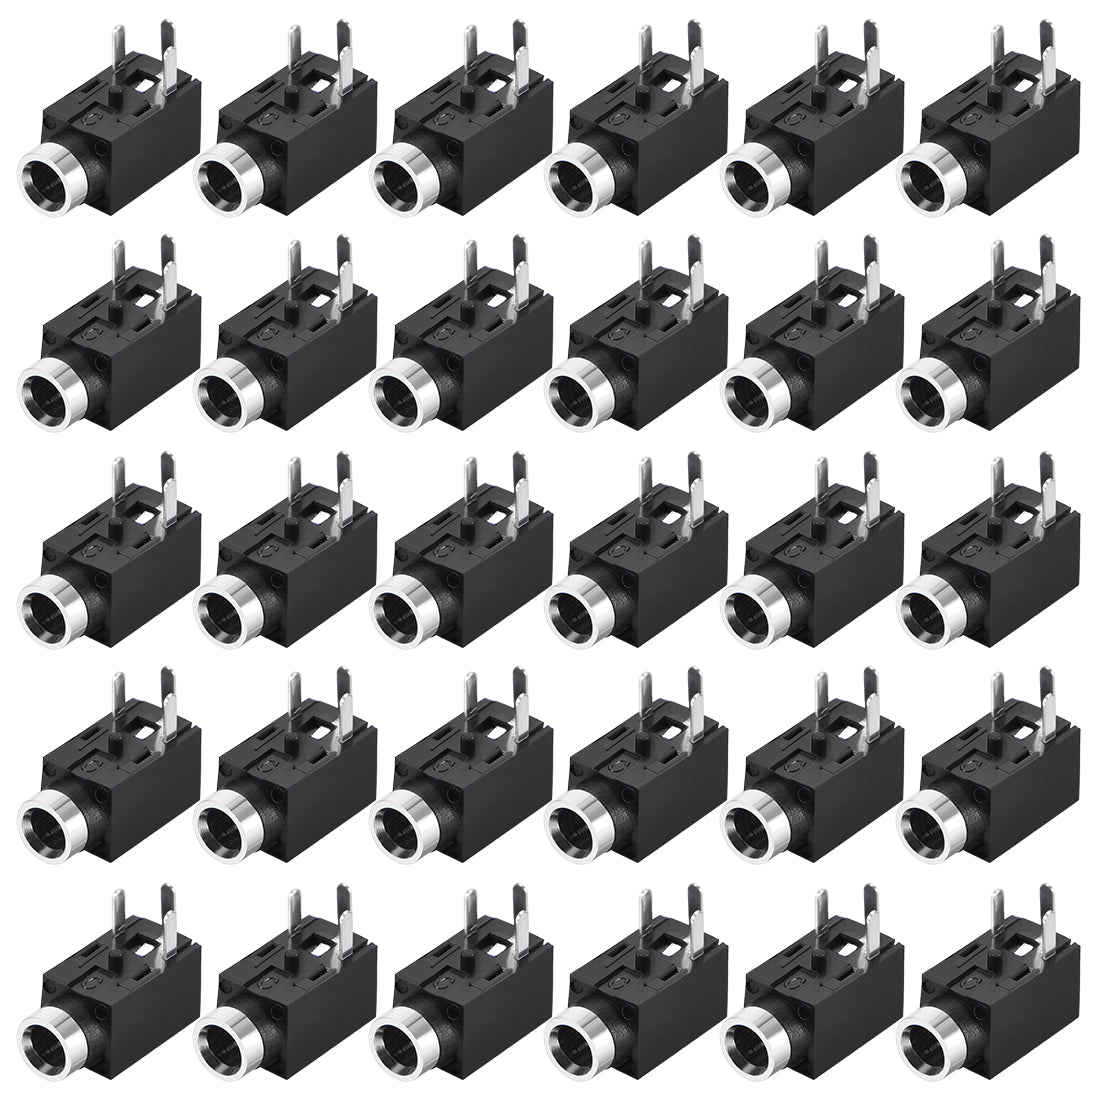 uxcell Uxcell PCB Mount 2.5mm 3 Pin Socket Headphone Stereo Jack Audio Video Connector PJ210 Black 30Pcs